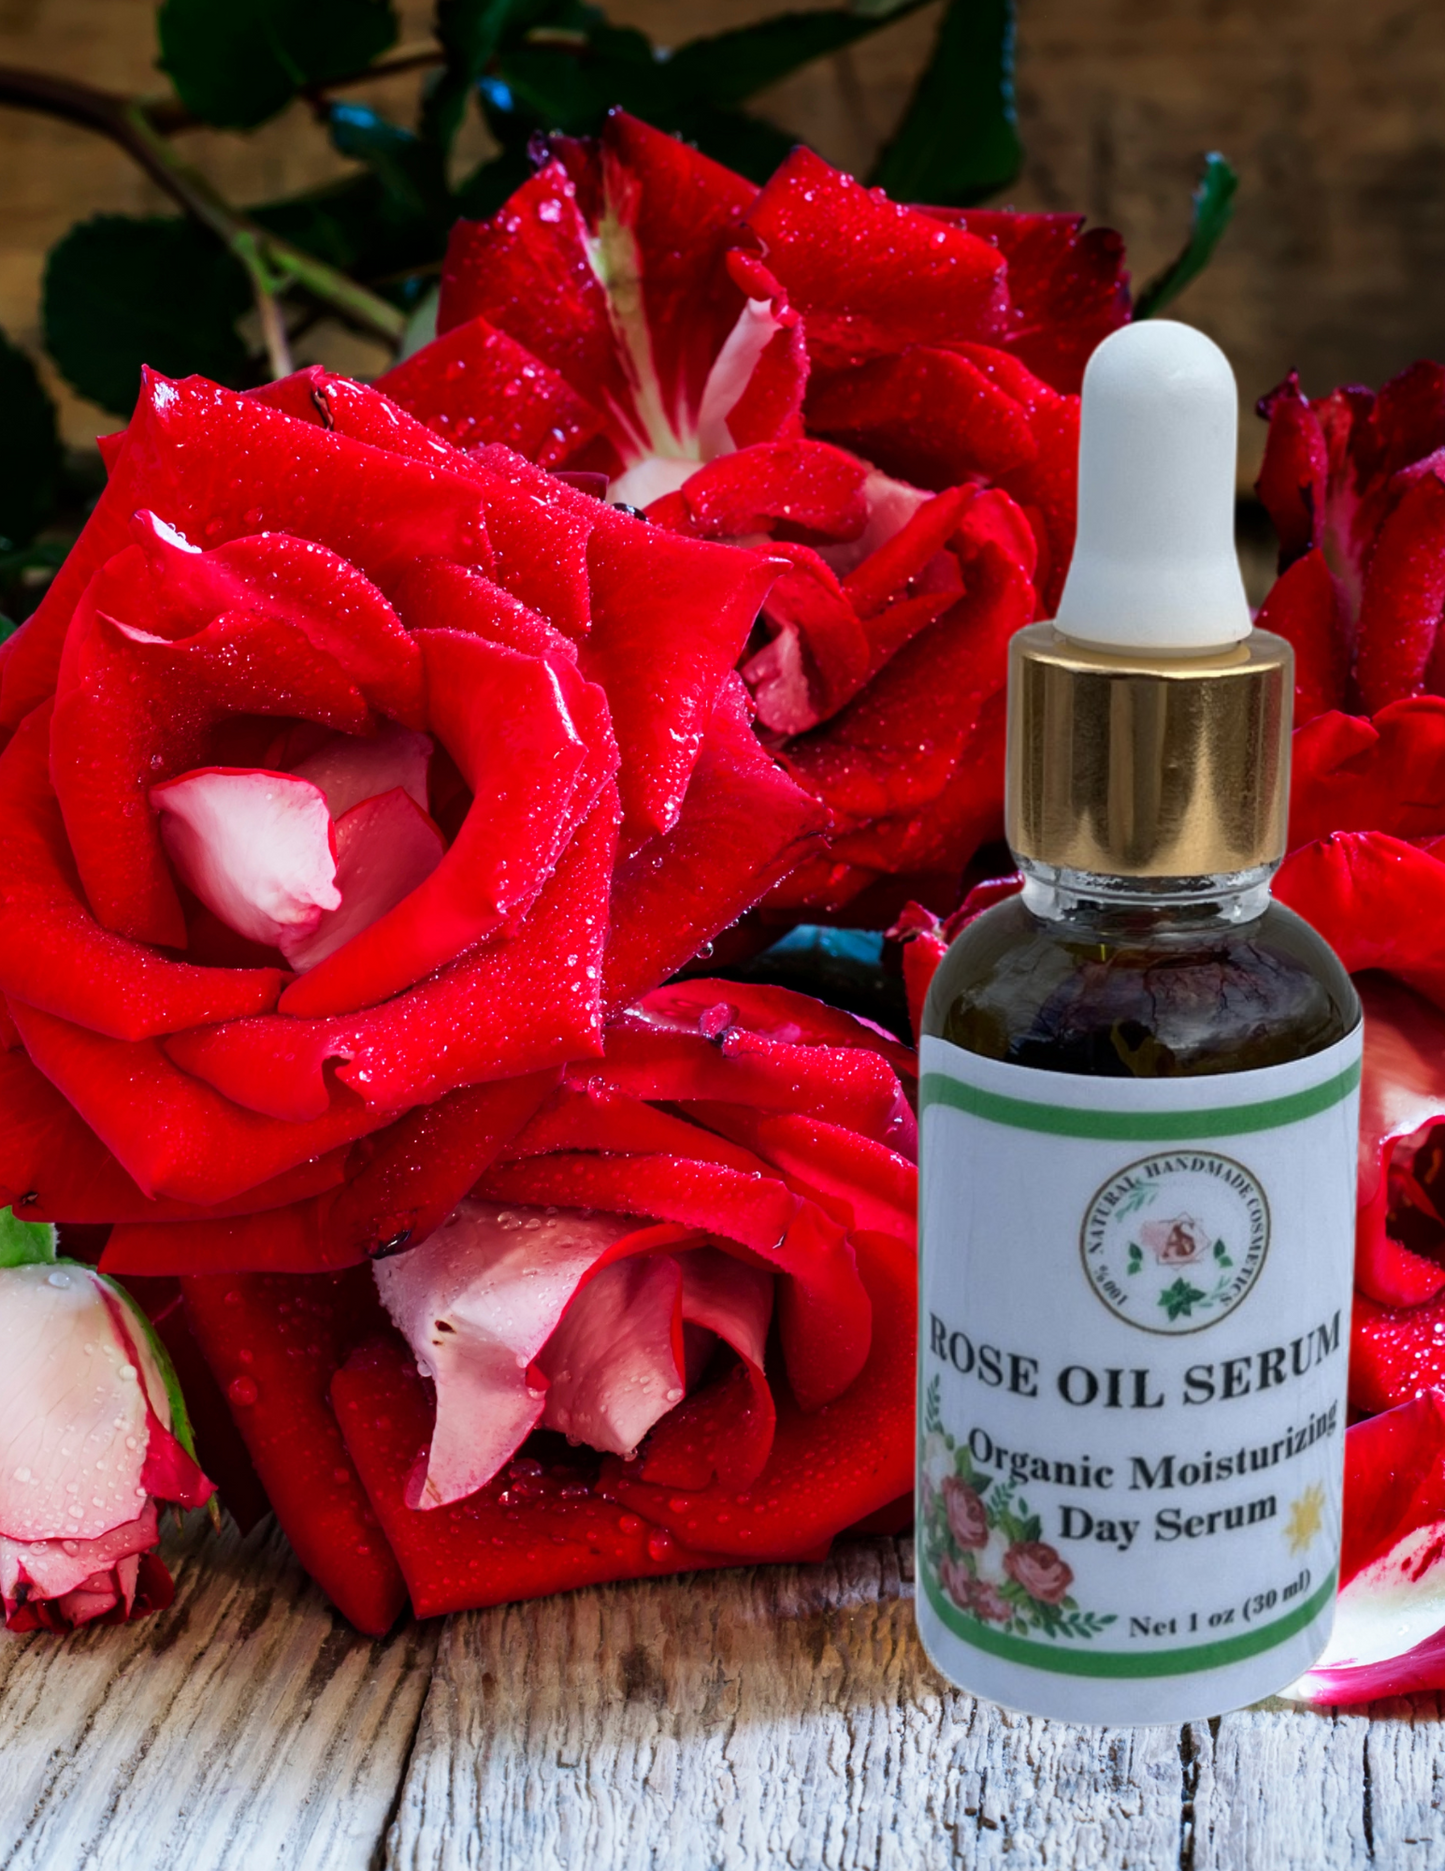 Organic Rose Oil Moisturizing Facial Serum, for the Day.